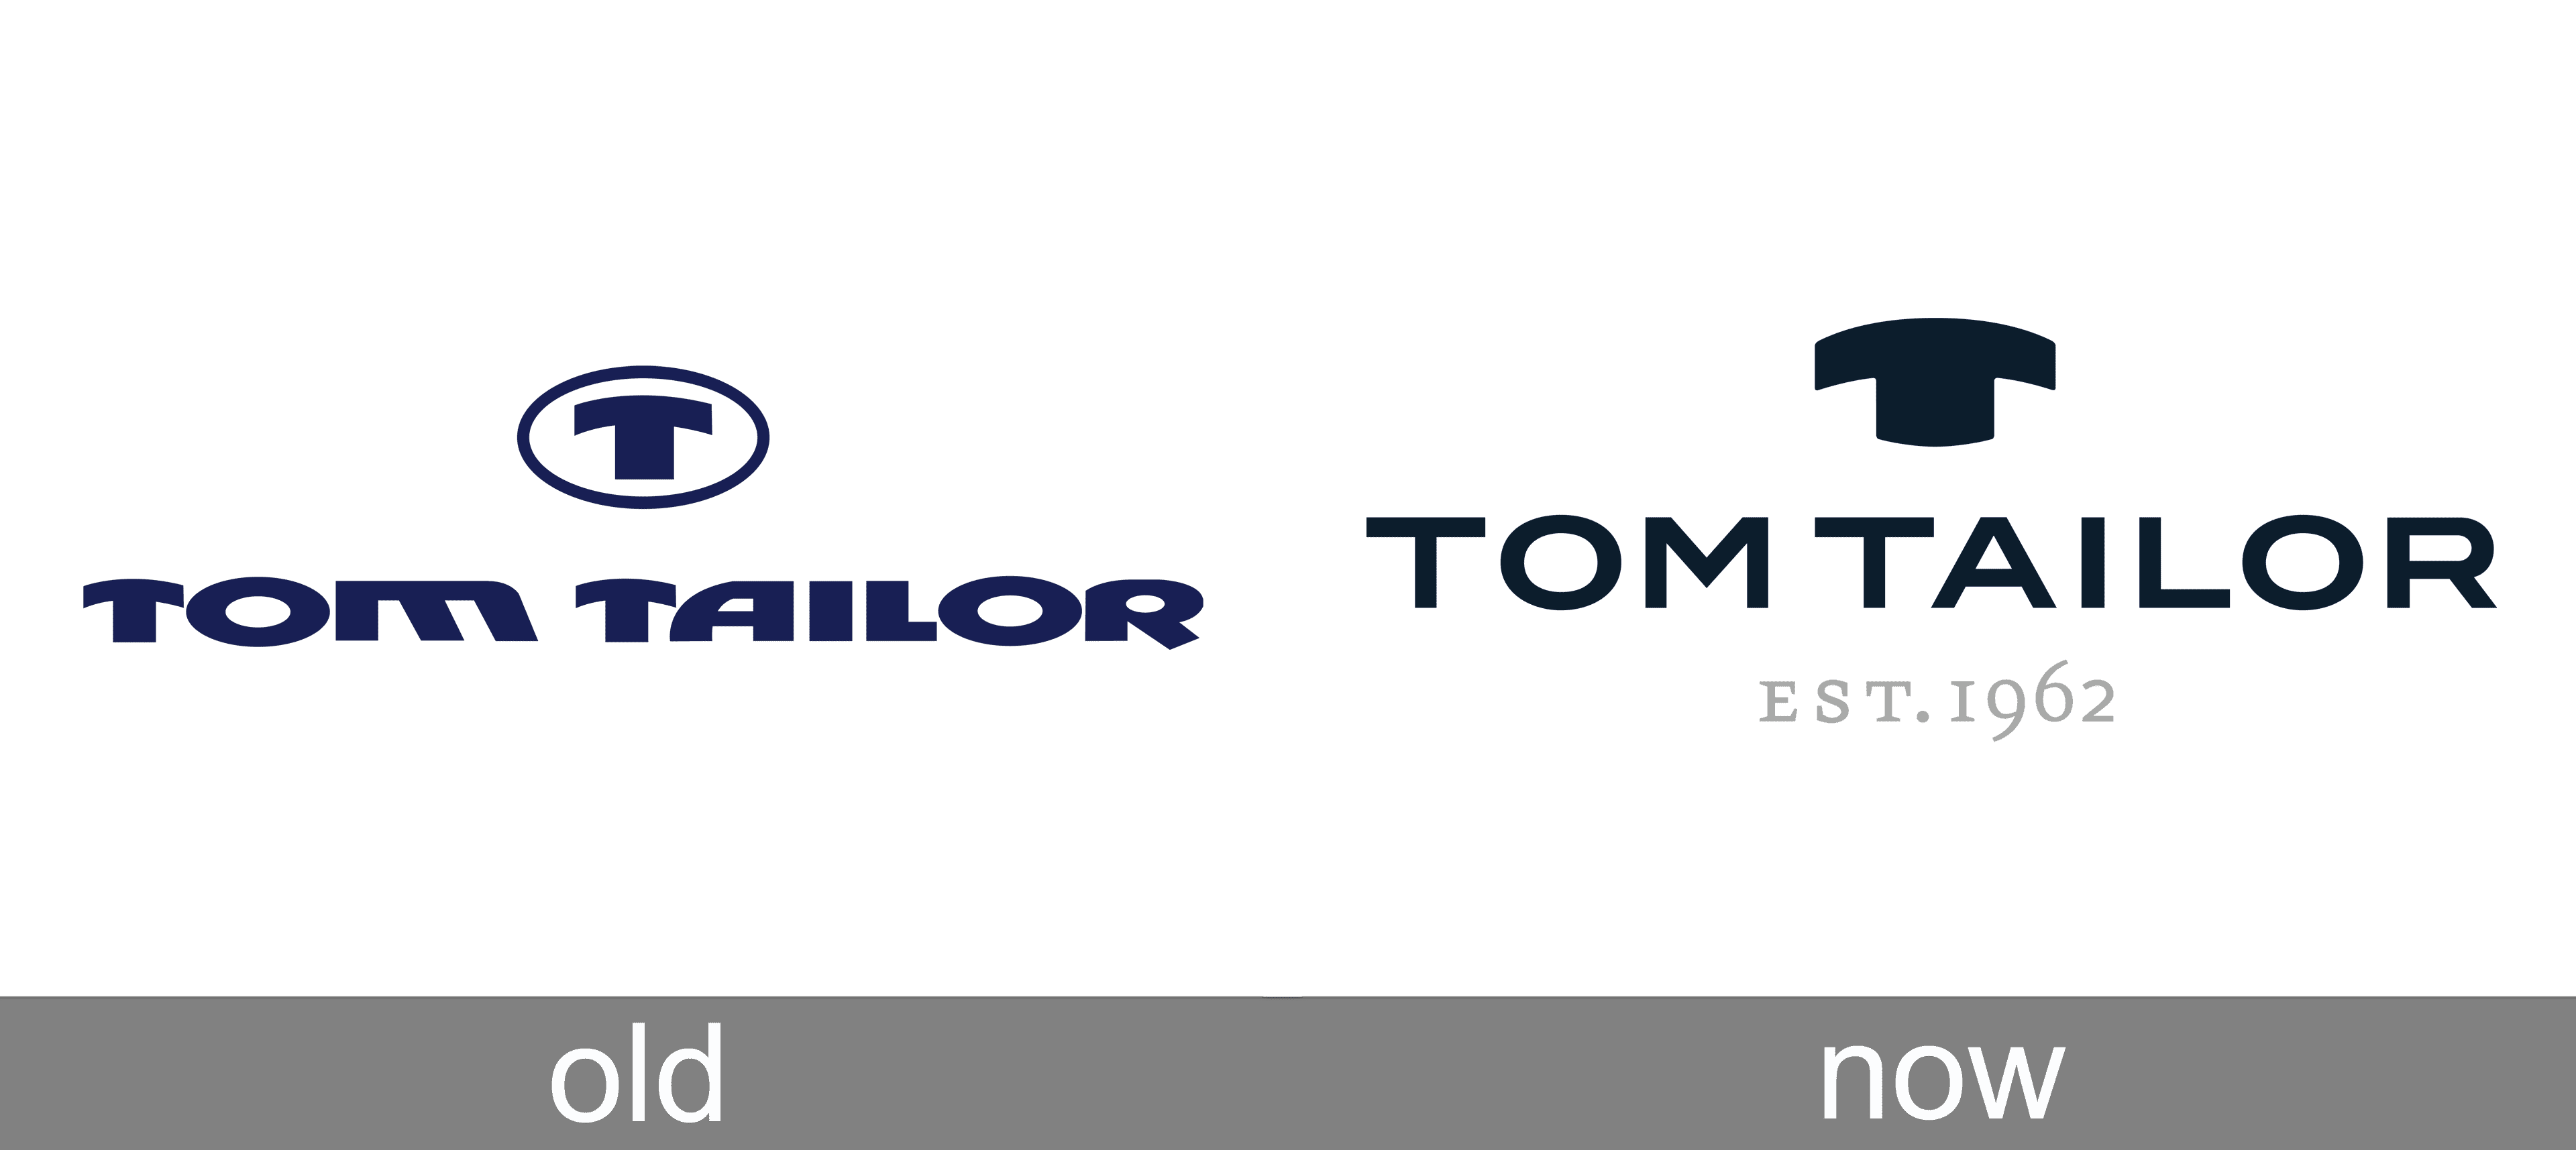 brand Tom and history, PNG, Logo meaning, Tailor symbol,